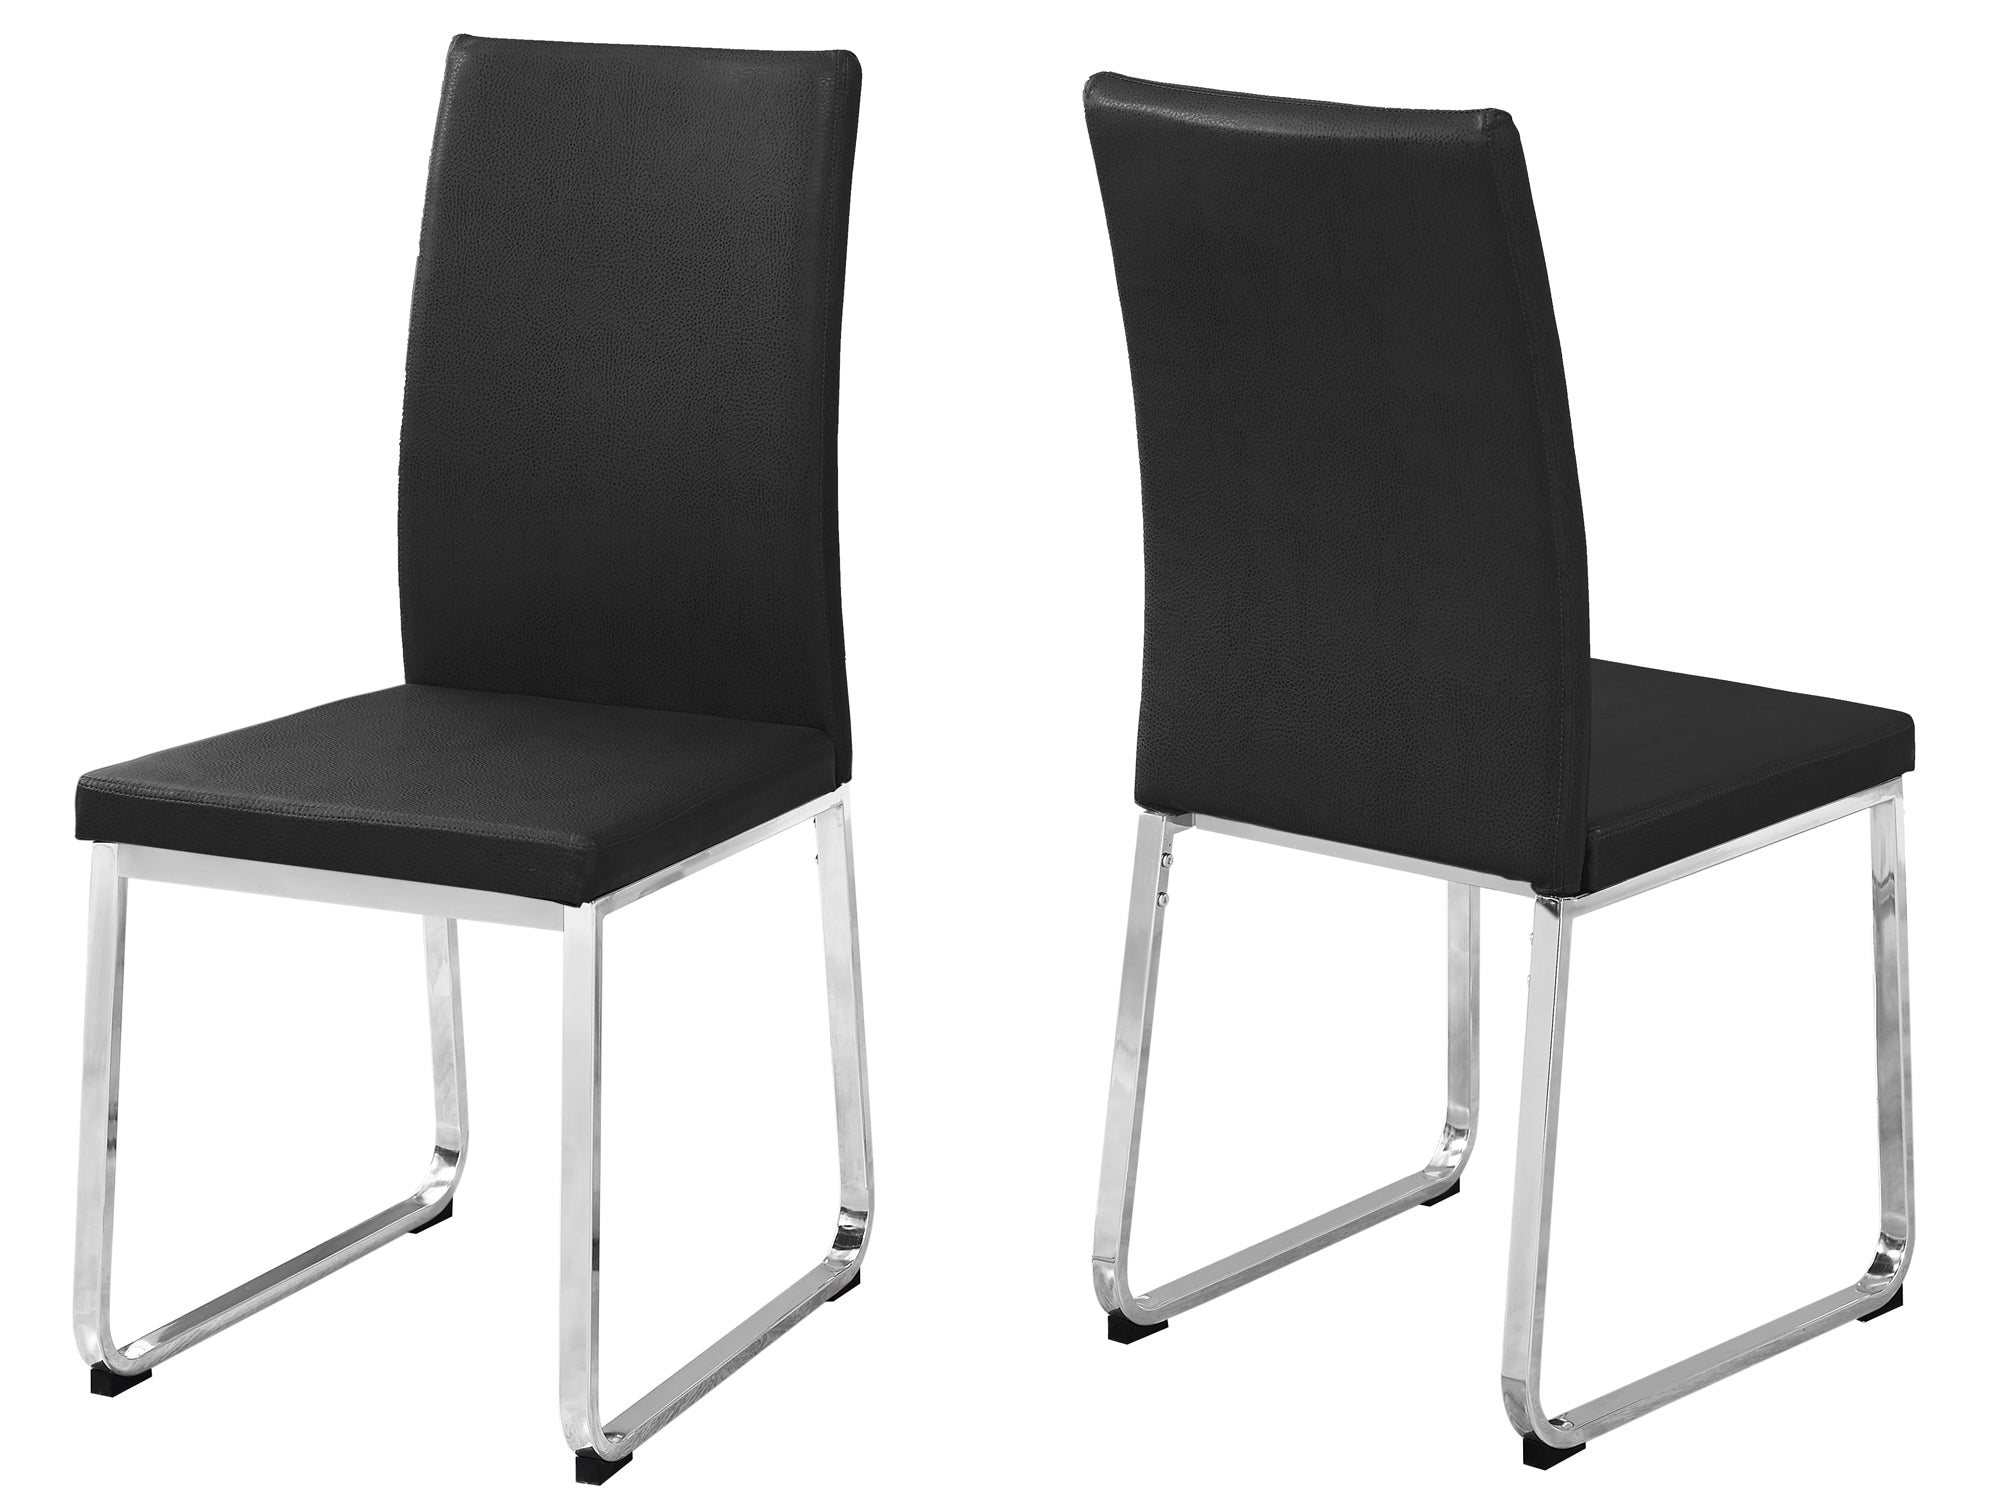 39.5" X 34" X 76" White Foam Metal Leather Look Dining Chairs 2Pcs